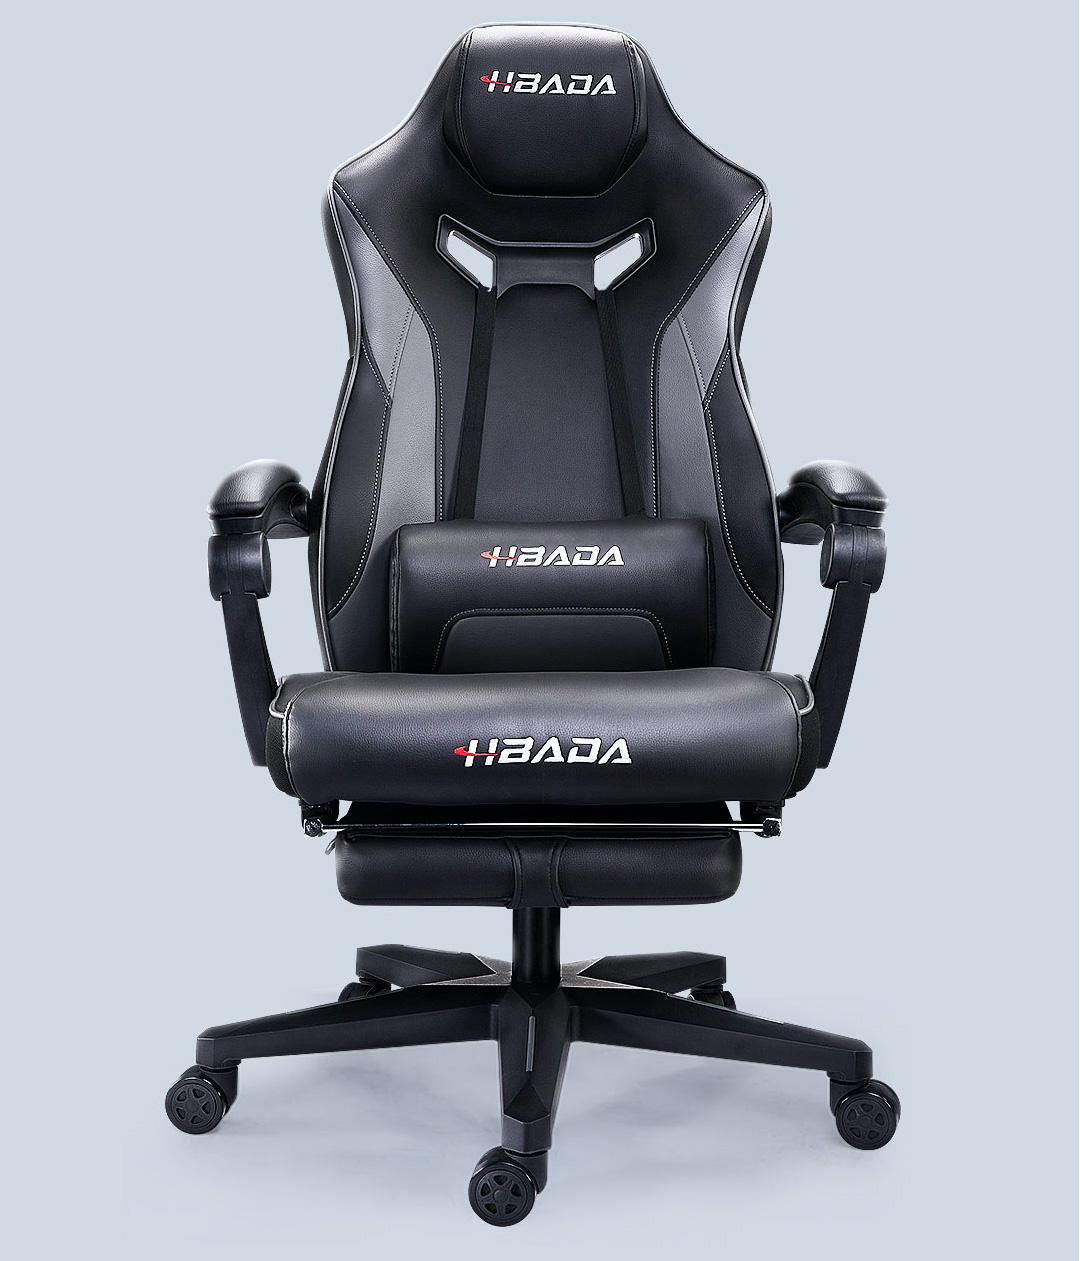 131 Support Xiaomi Hbada Gaming Chair Knight Edition